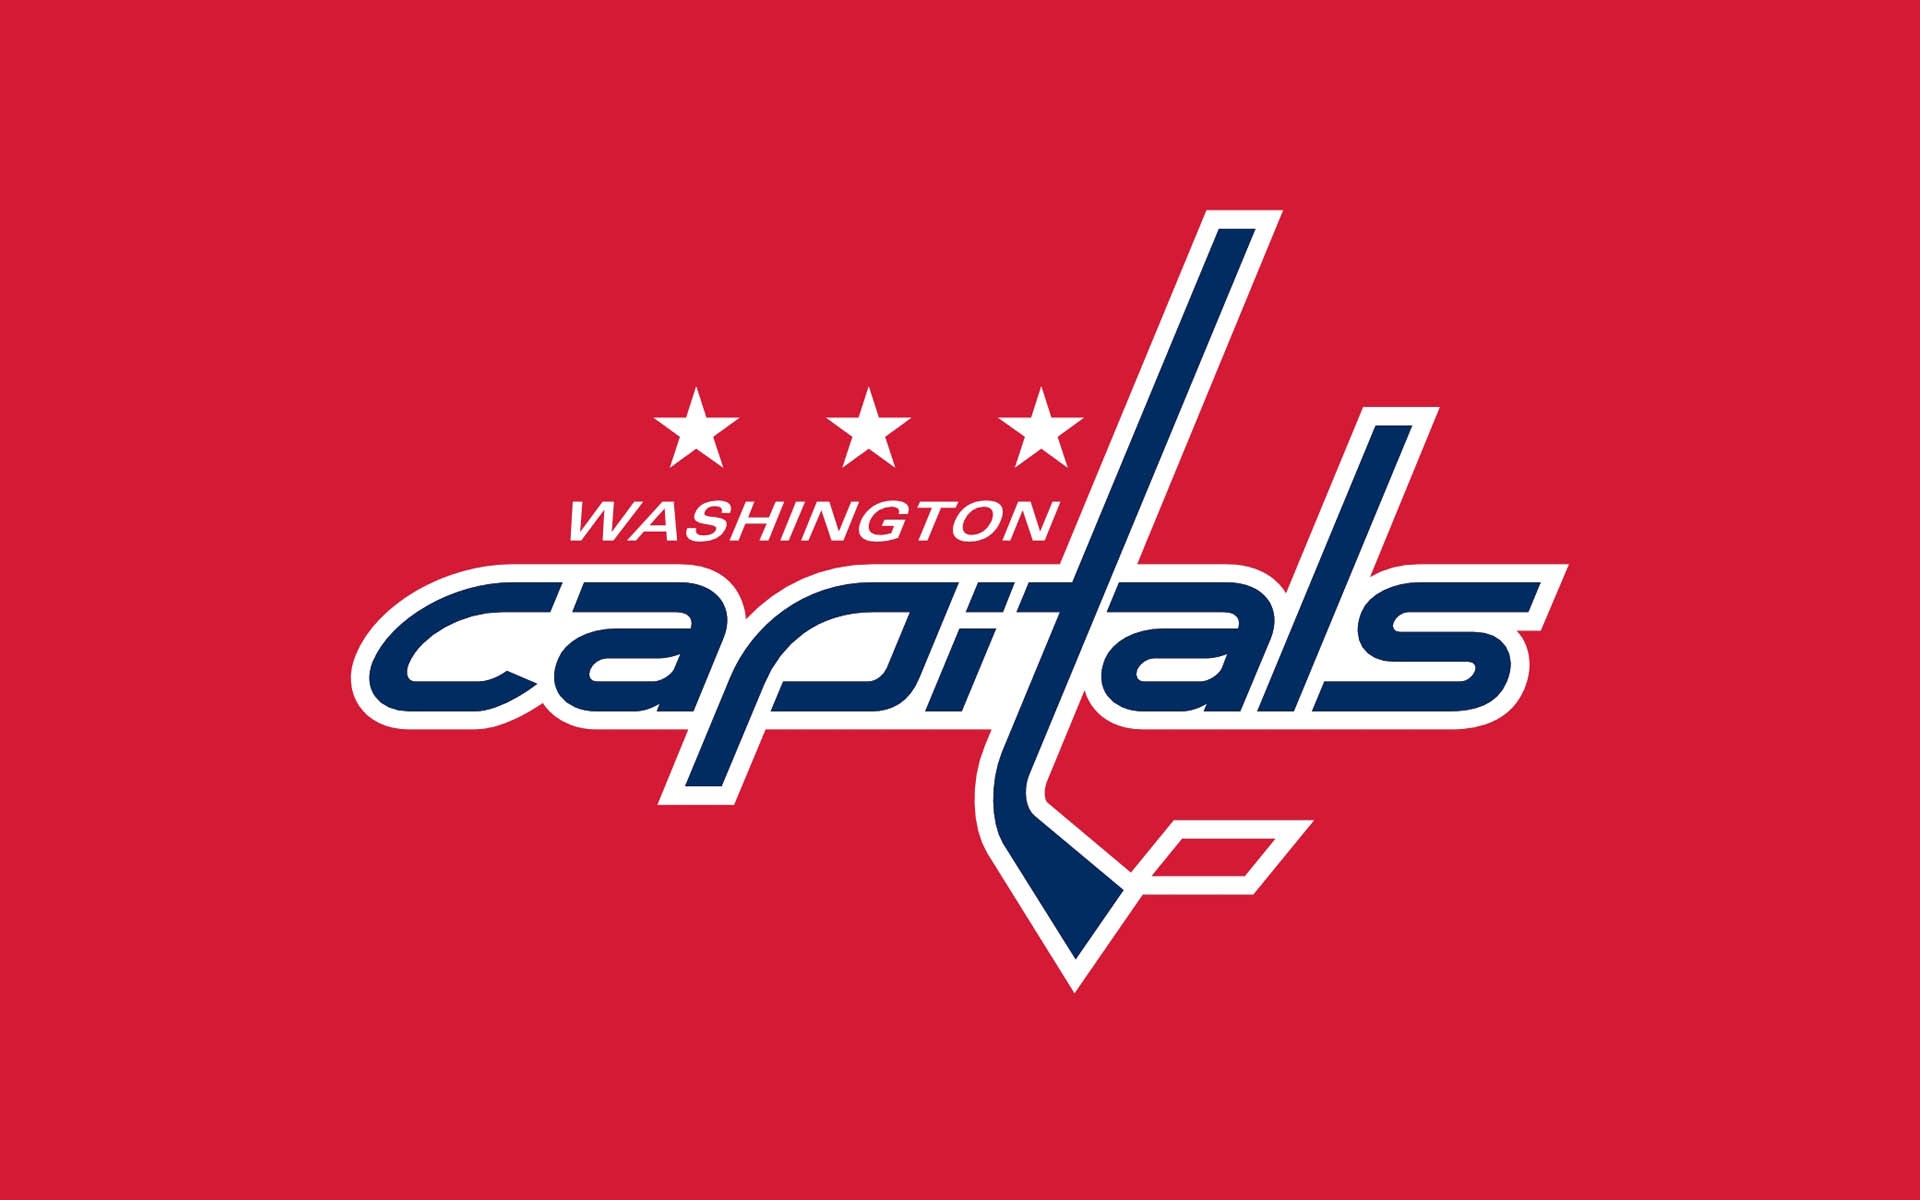 Washington Capitals Logo, collection, 1920x1200 HD Wallpaper and other